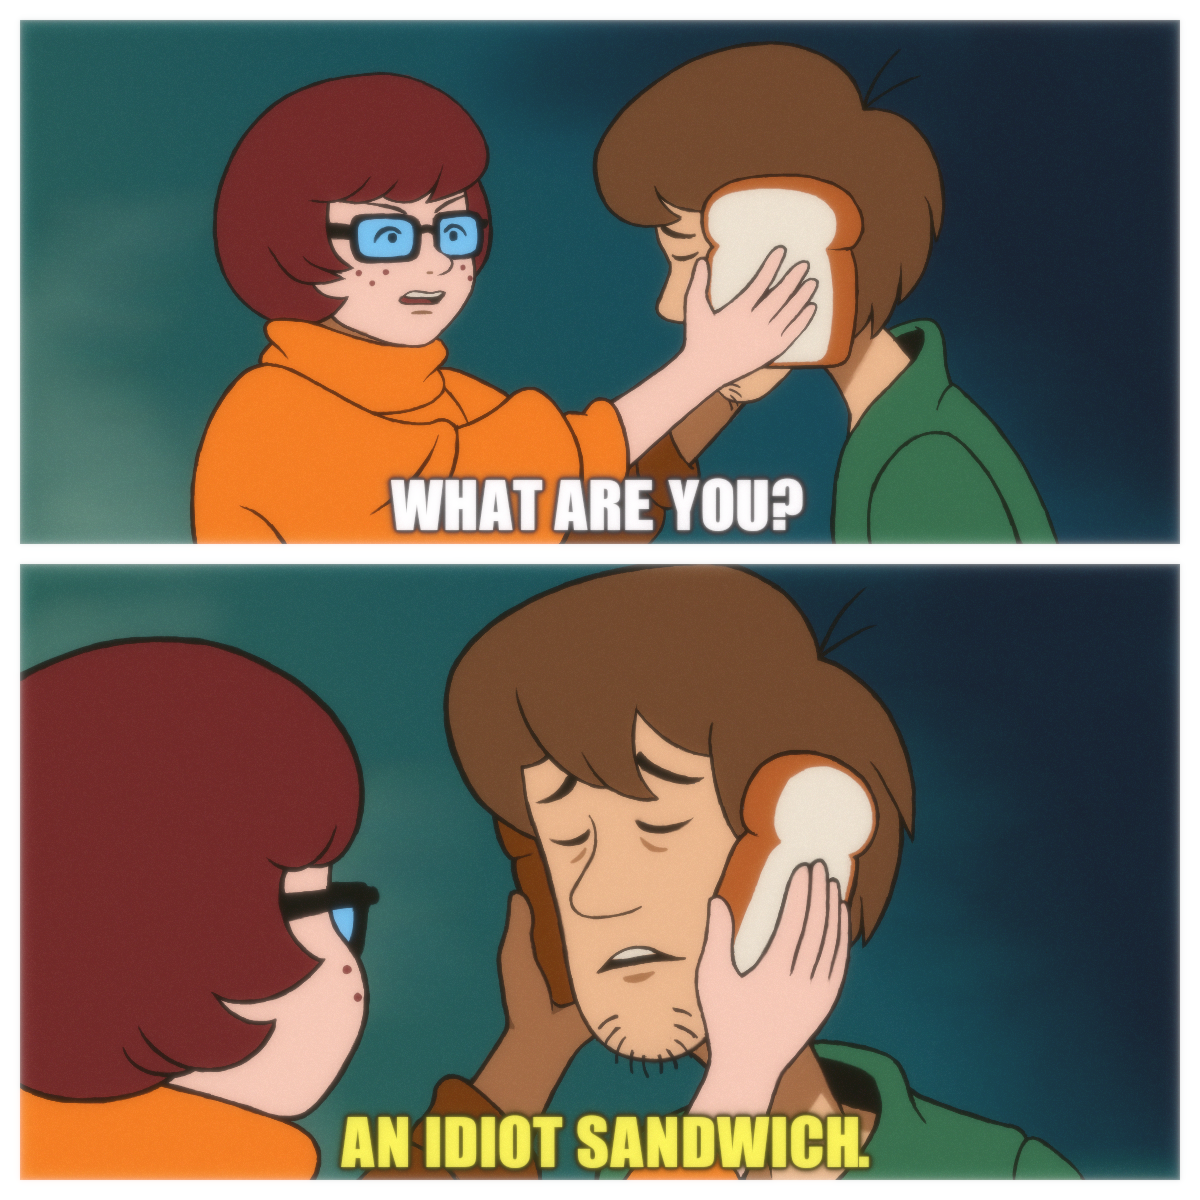 Velma forces Shaggy to admit that he's an idiot sandwich